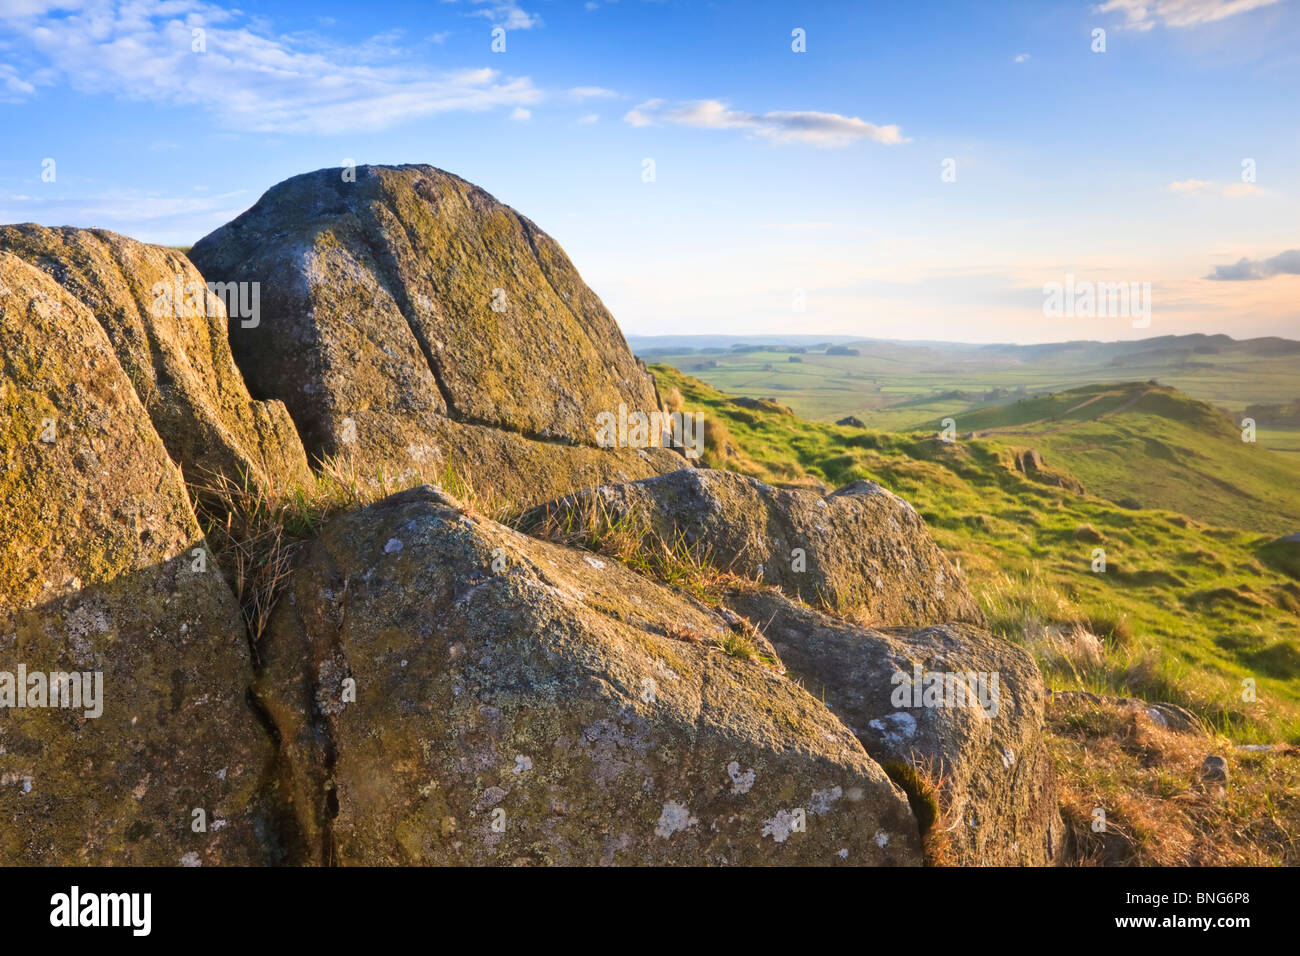 Dolerite rocks of the Whin Sill formation erupting from the landscape of Caw Gap on Hadrian's Wall, Northumberland, England Stock Photo